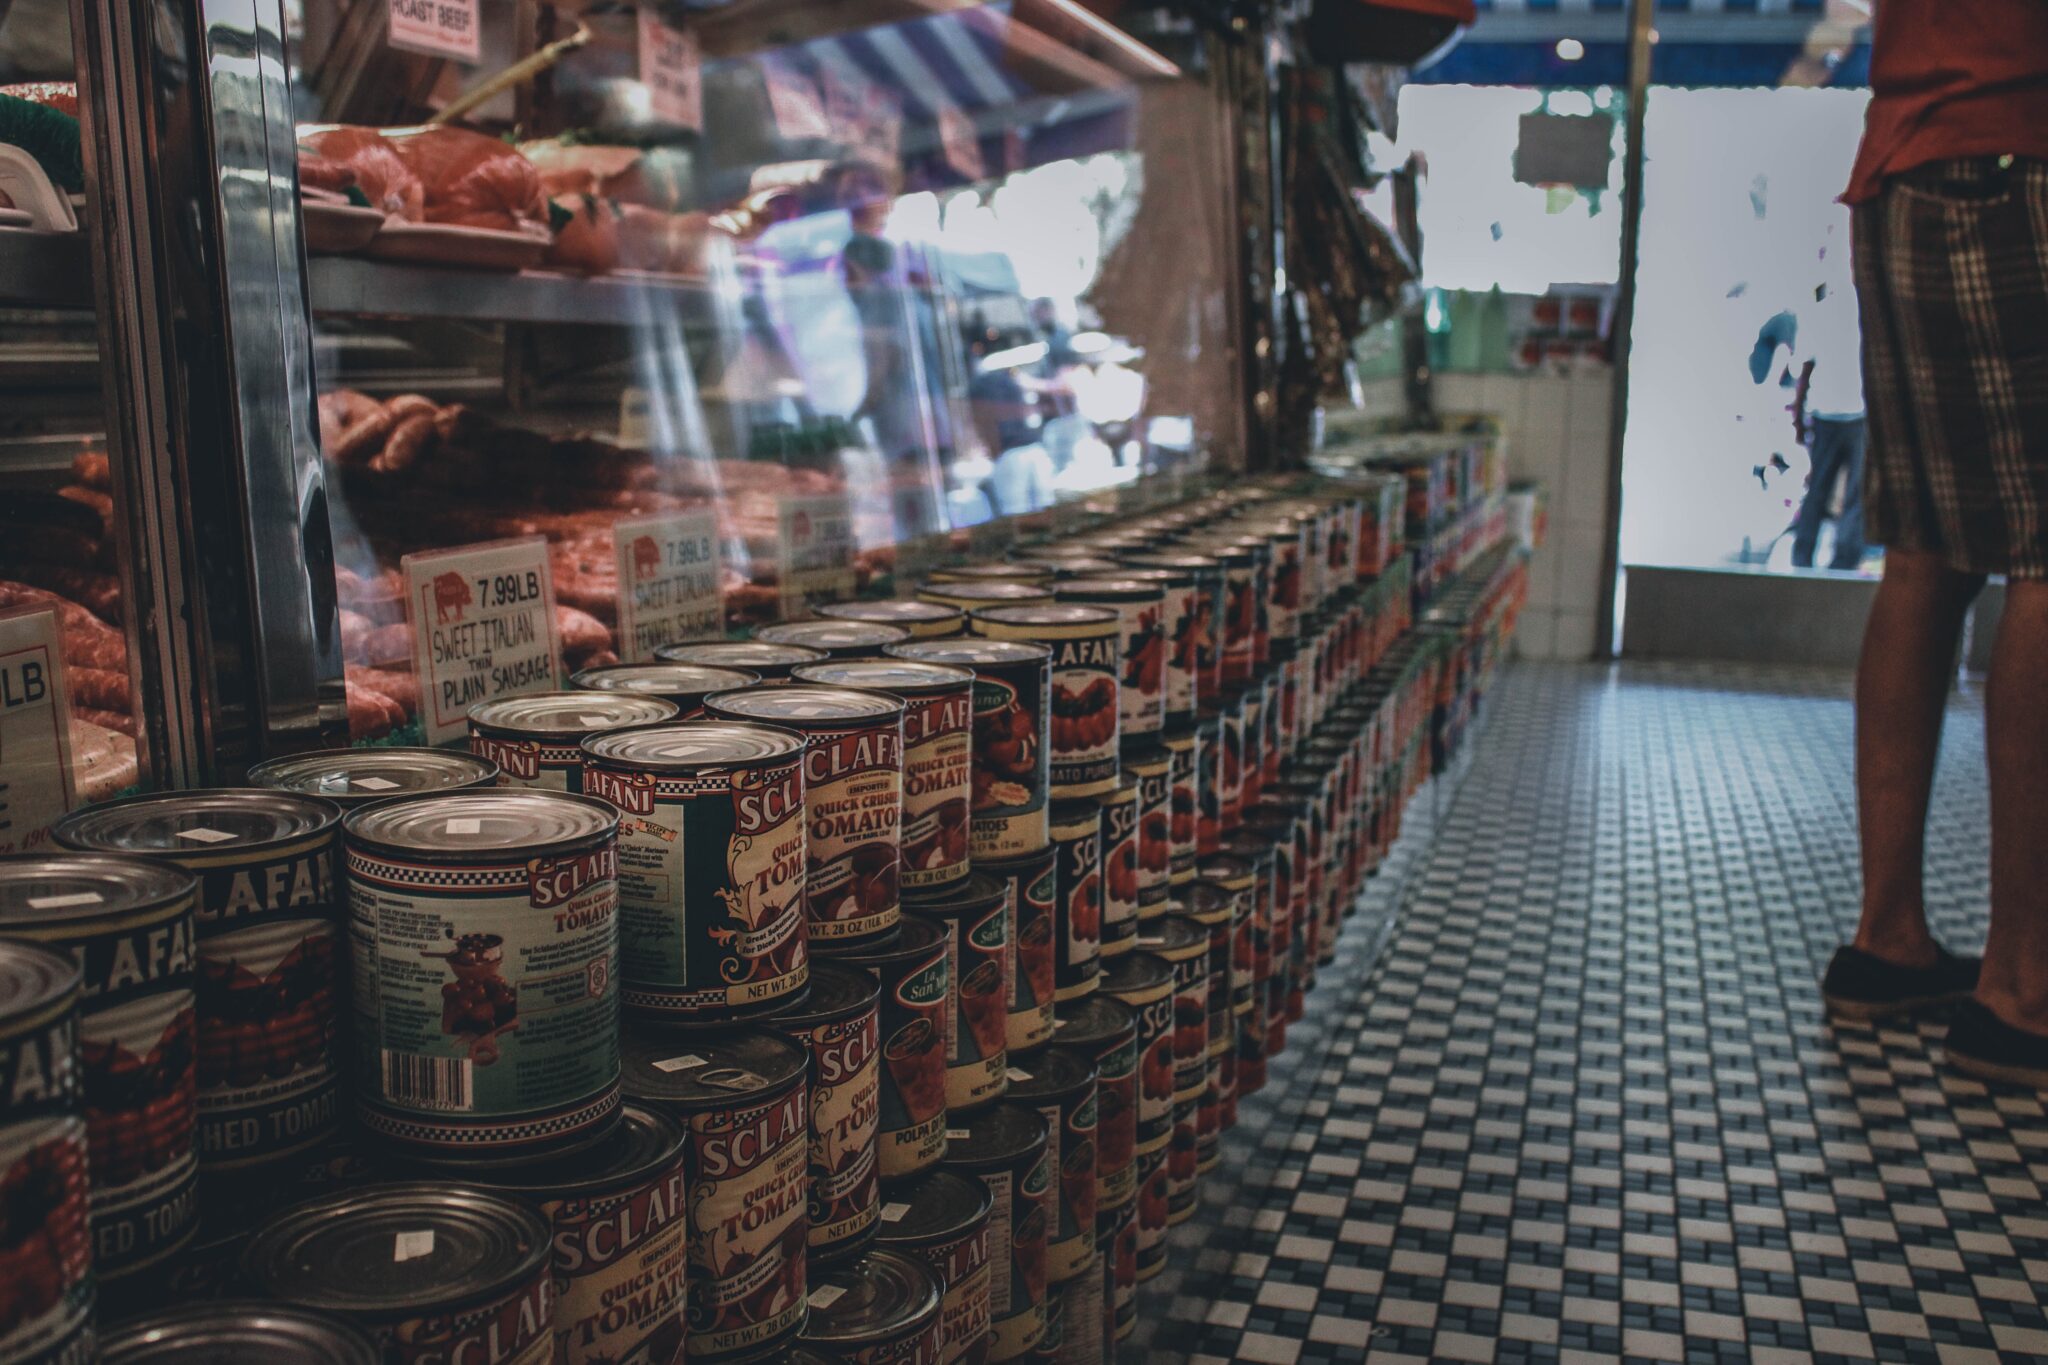 A row of canned goods lined on the floor inside the convenience store. 